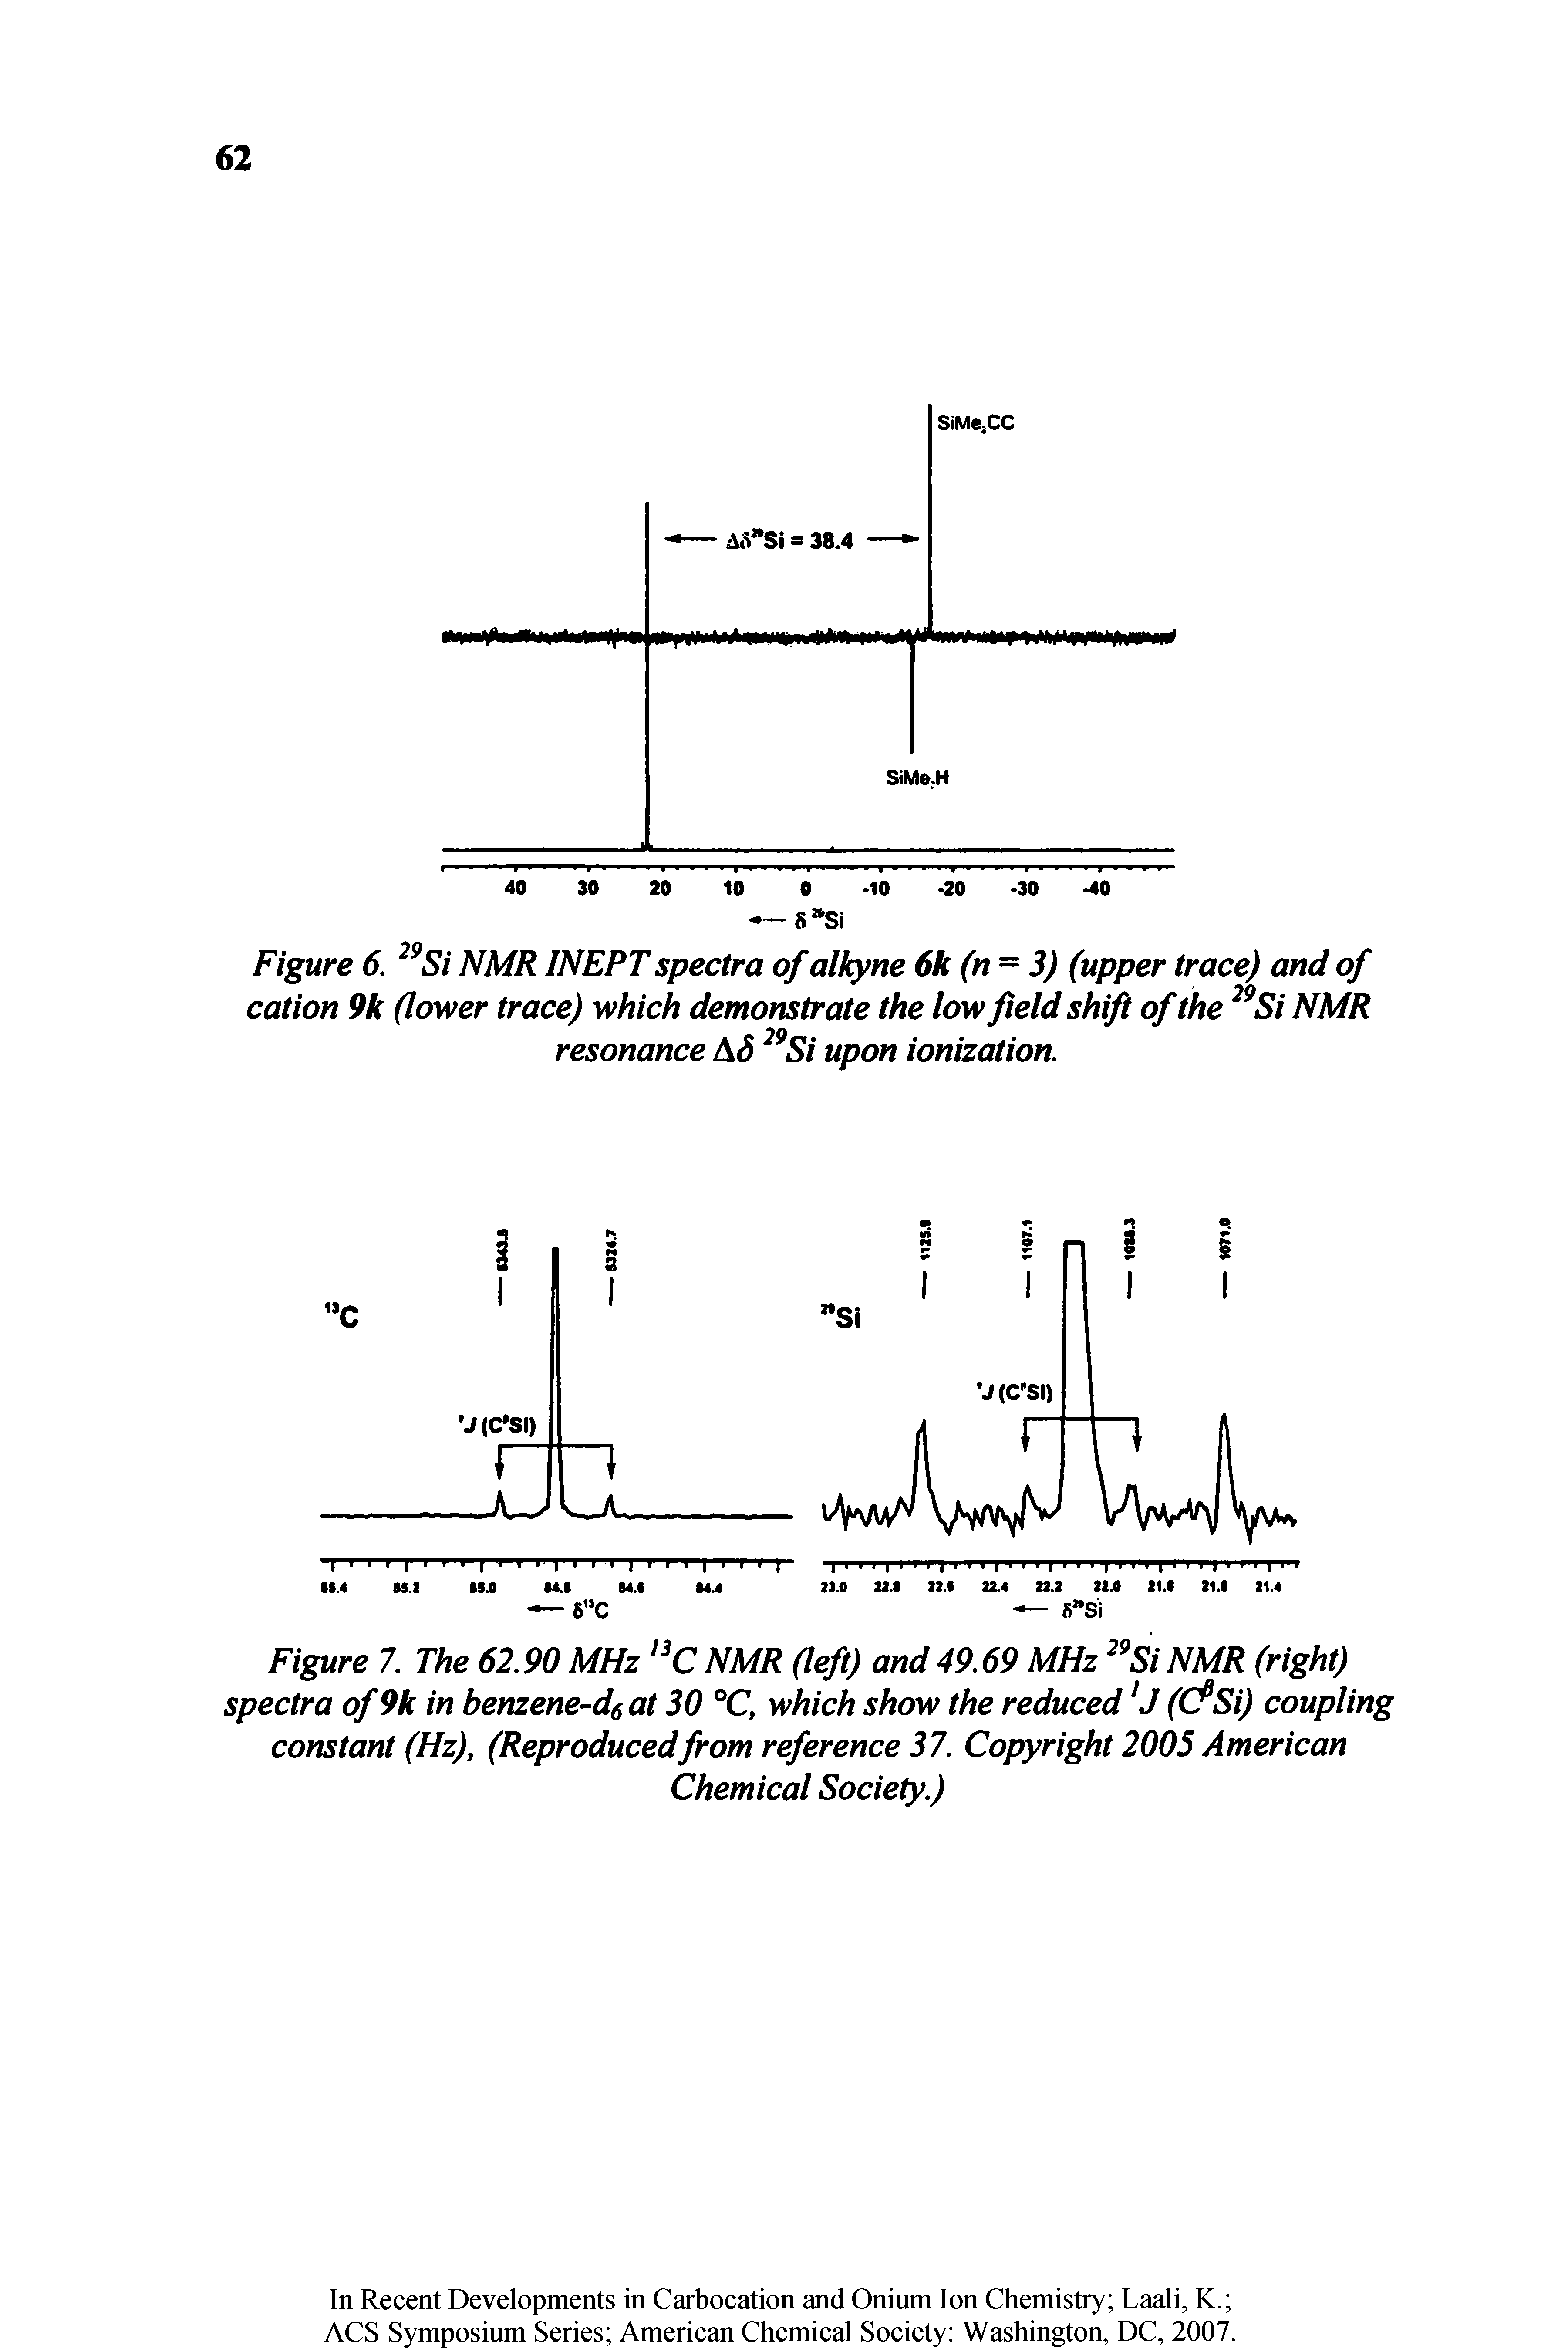 Figure 6. 29Si NMR INEPT spectra of alkyne 6k (n = 3) (upper trace) and of cation 9k (lower trace) which demonstrate the low field shift of the 29Si NMR resonance AS 29Si upon ionization.